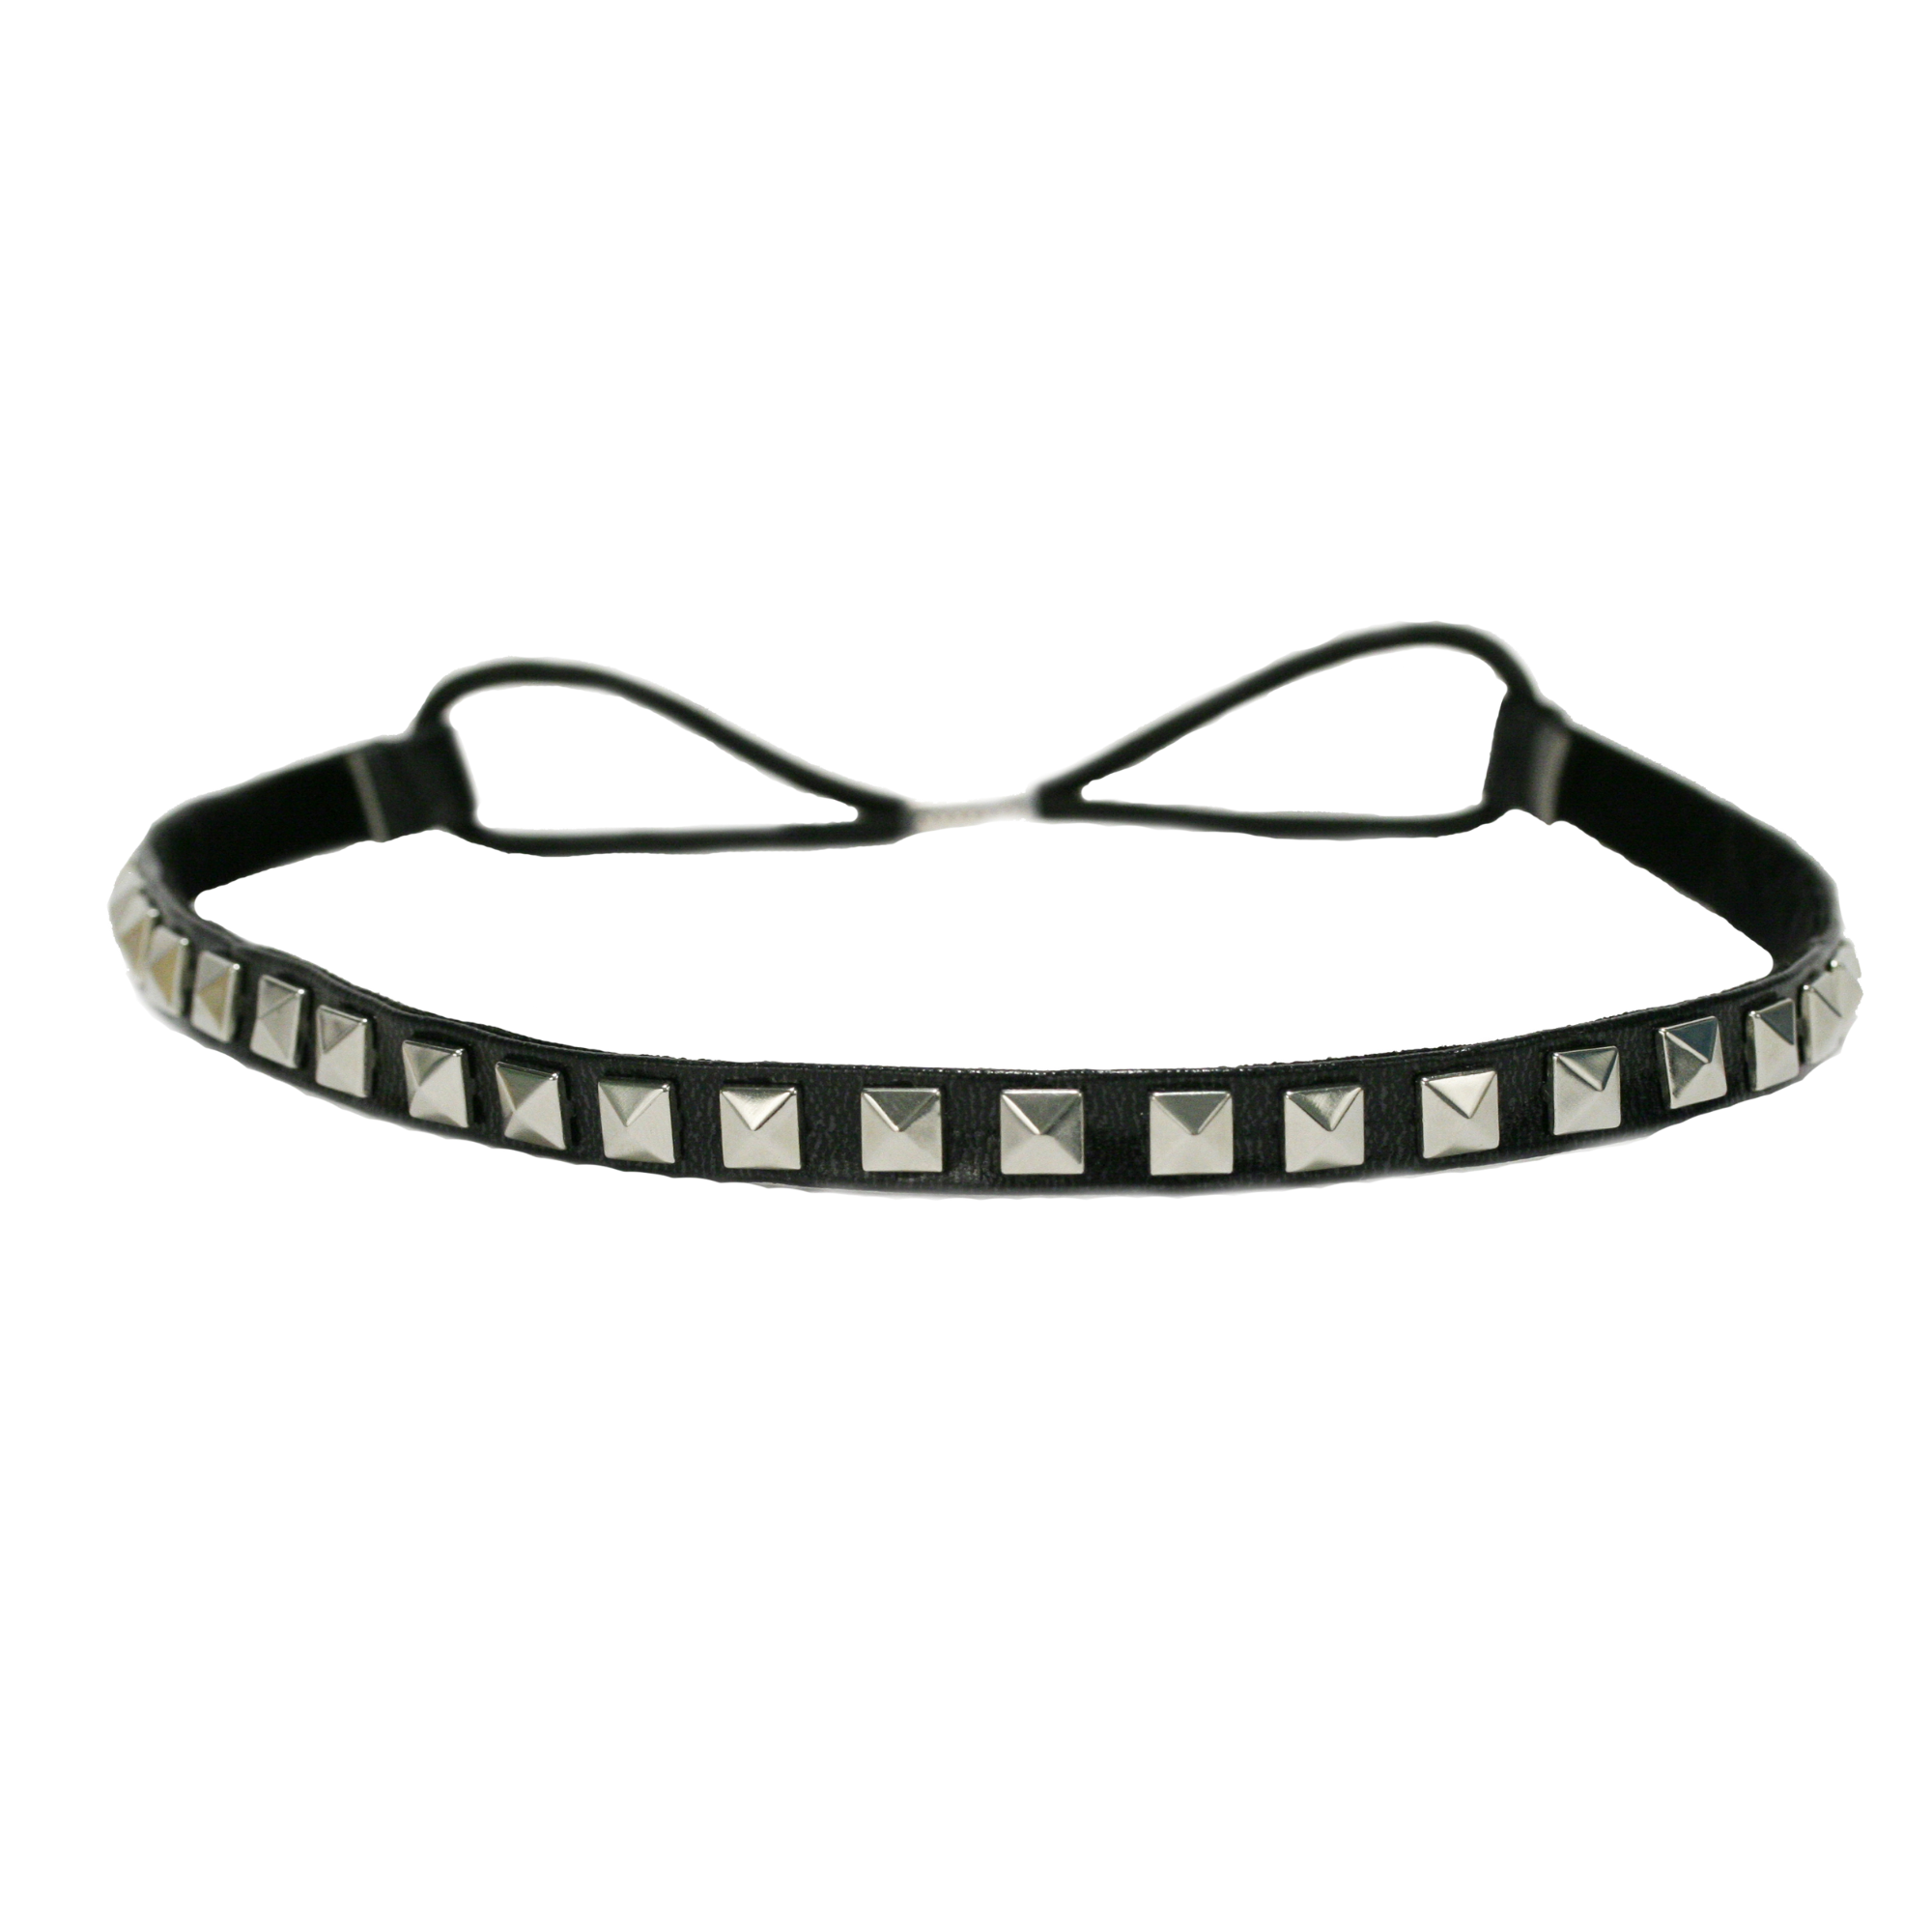 Mia® Studded Headband with Square Metal Studs - black and silver 